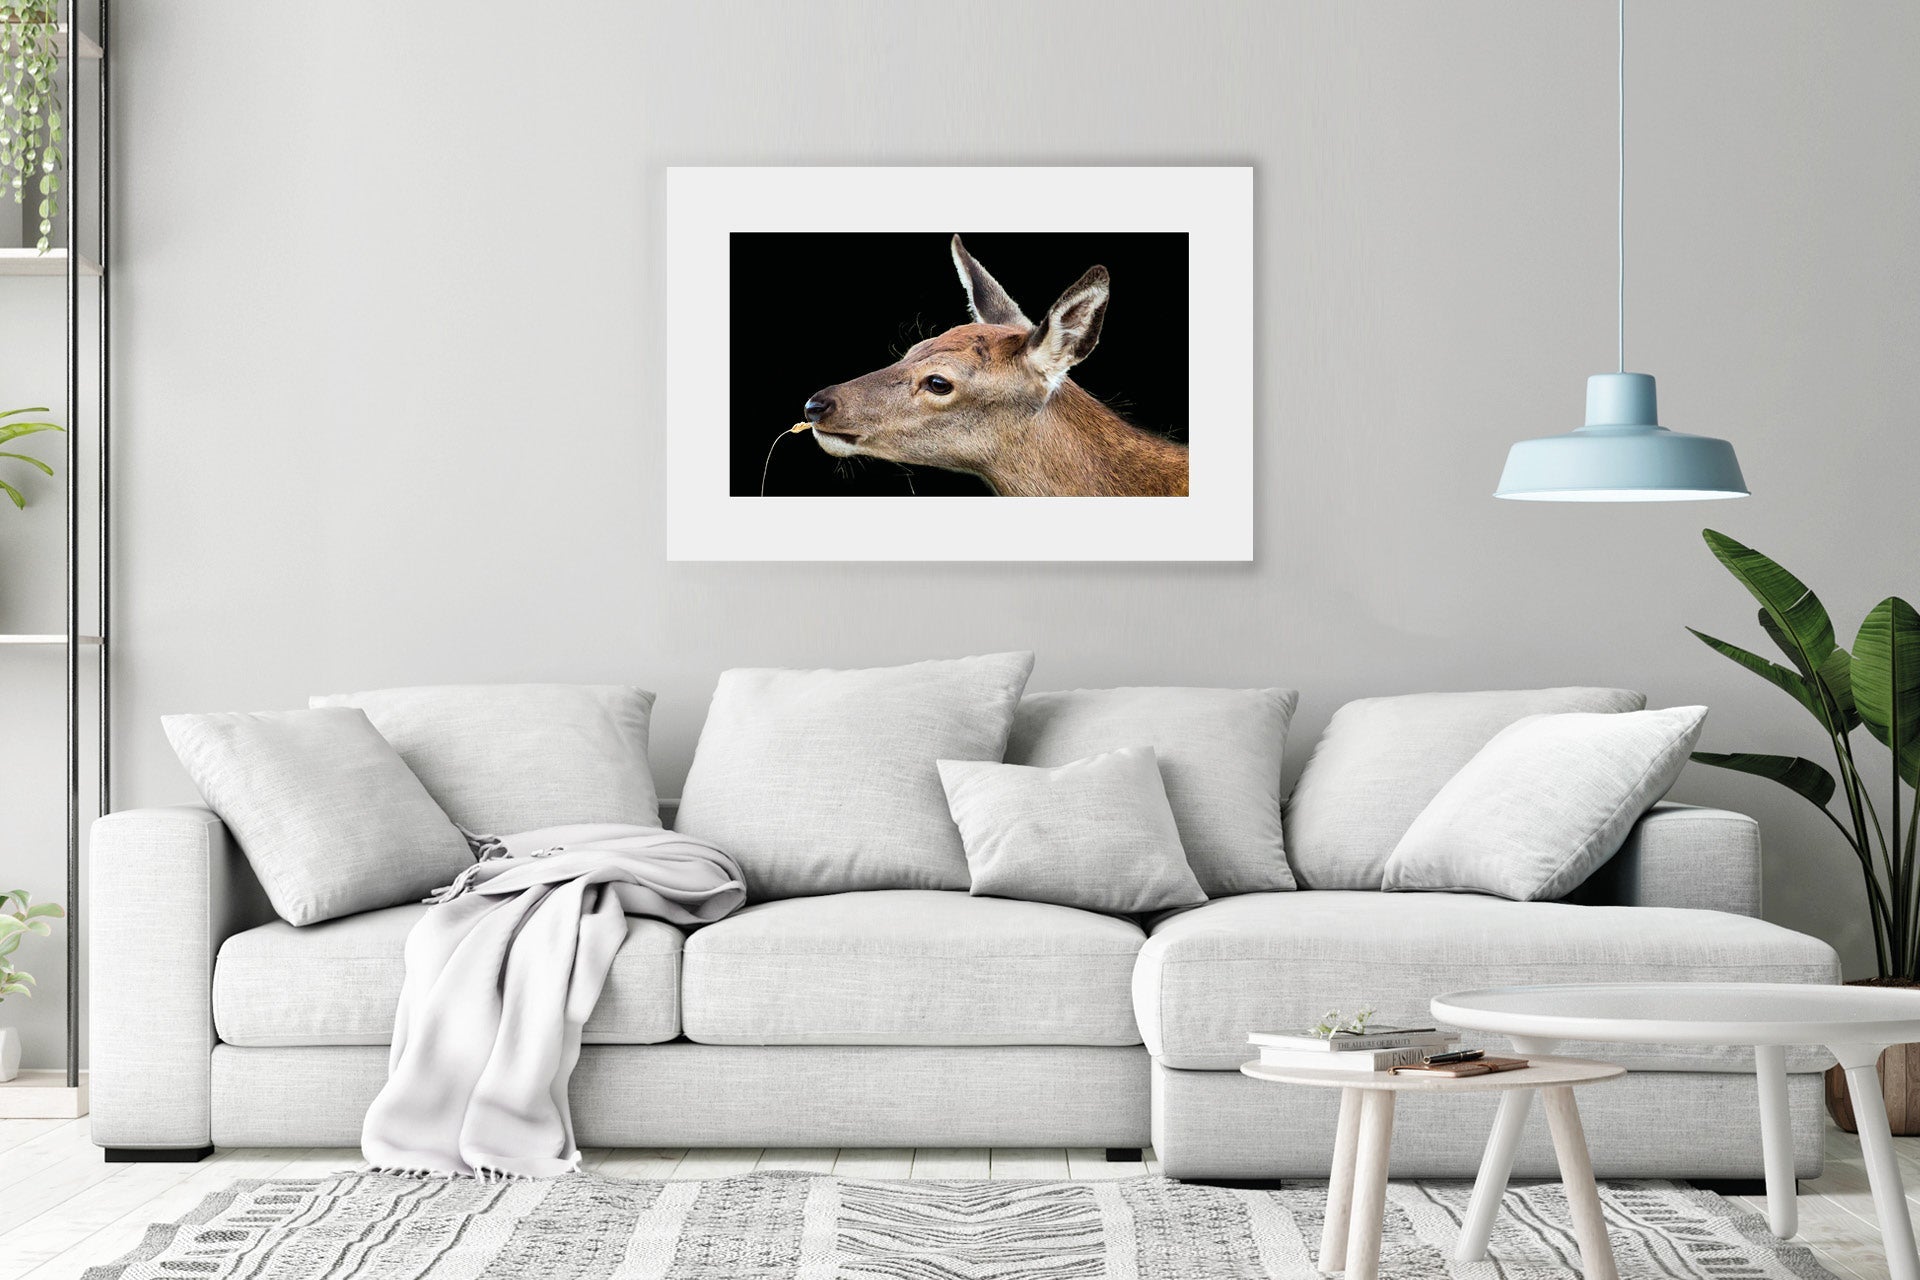 New Zealand red deer fawn image